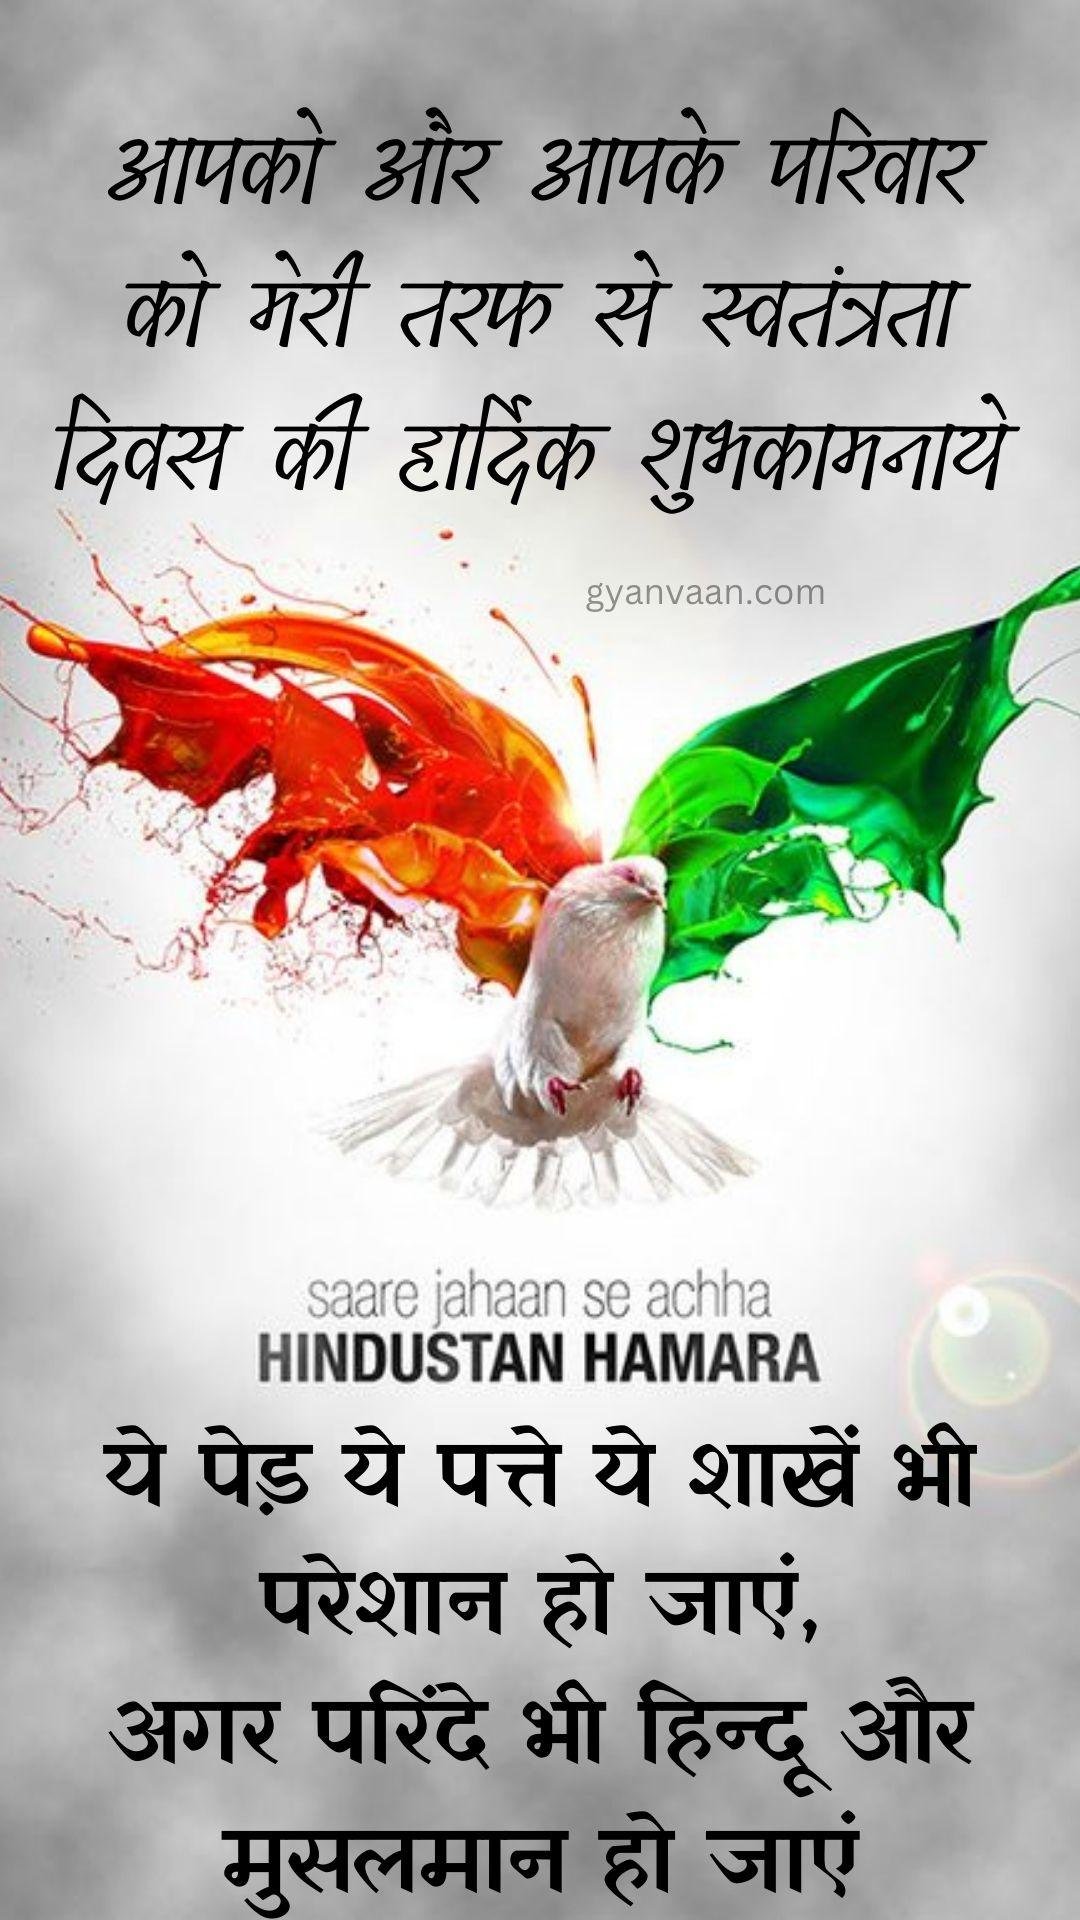 Independence Day Quotes In Hindi With Shayari Slogan Wishes For Whatsapp Status Mobile 13 - Independence Day Quotes In Hindi